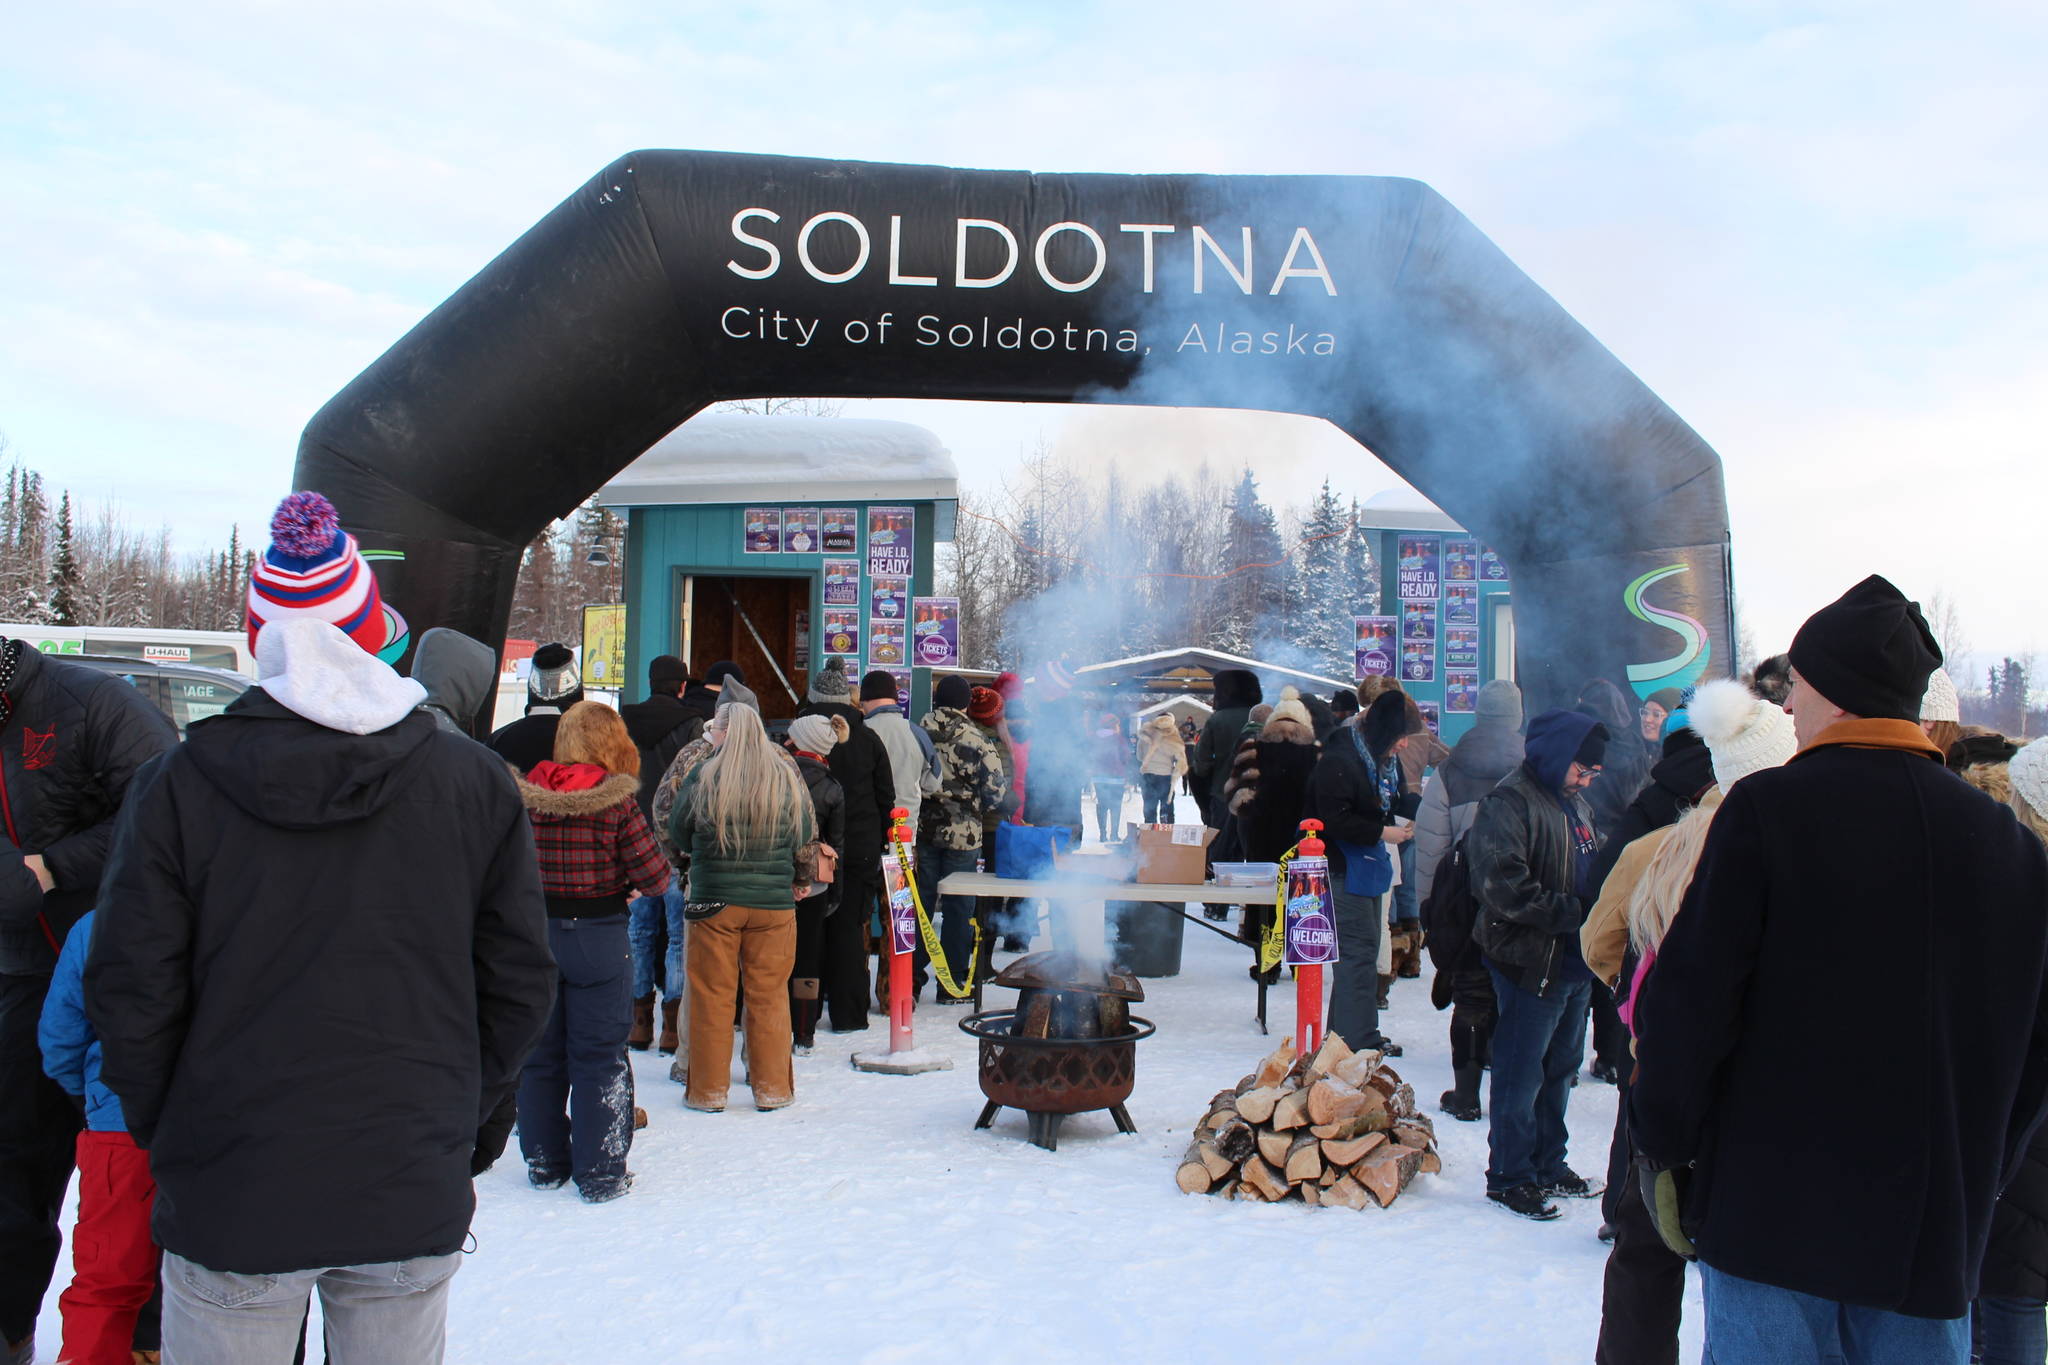 Attendees line up to get into the 2020 Frozen RiverFest at Soldotna Creek Park in Soldotna, Alaska on Feb. 15, 2020. (Photo by Brian Mazurek/Peninsula Clarion)